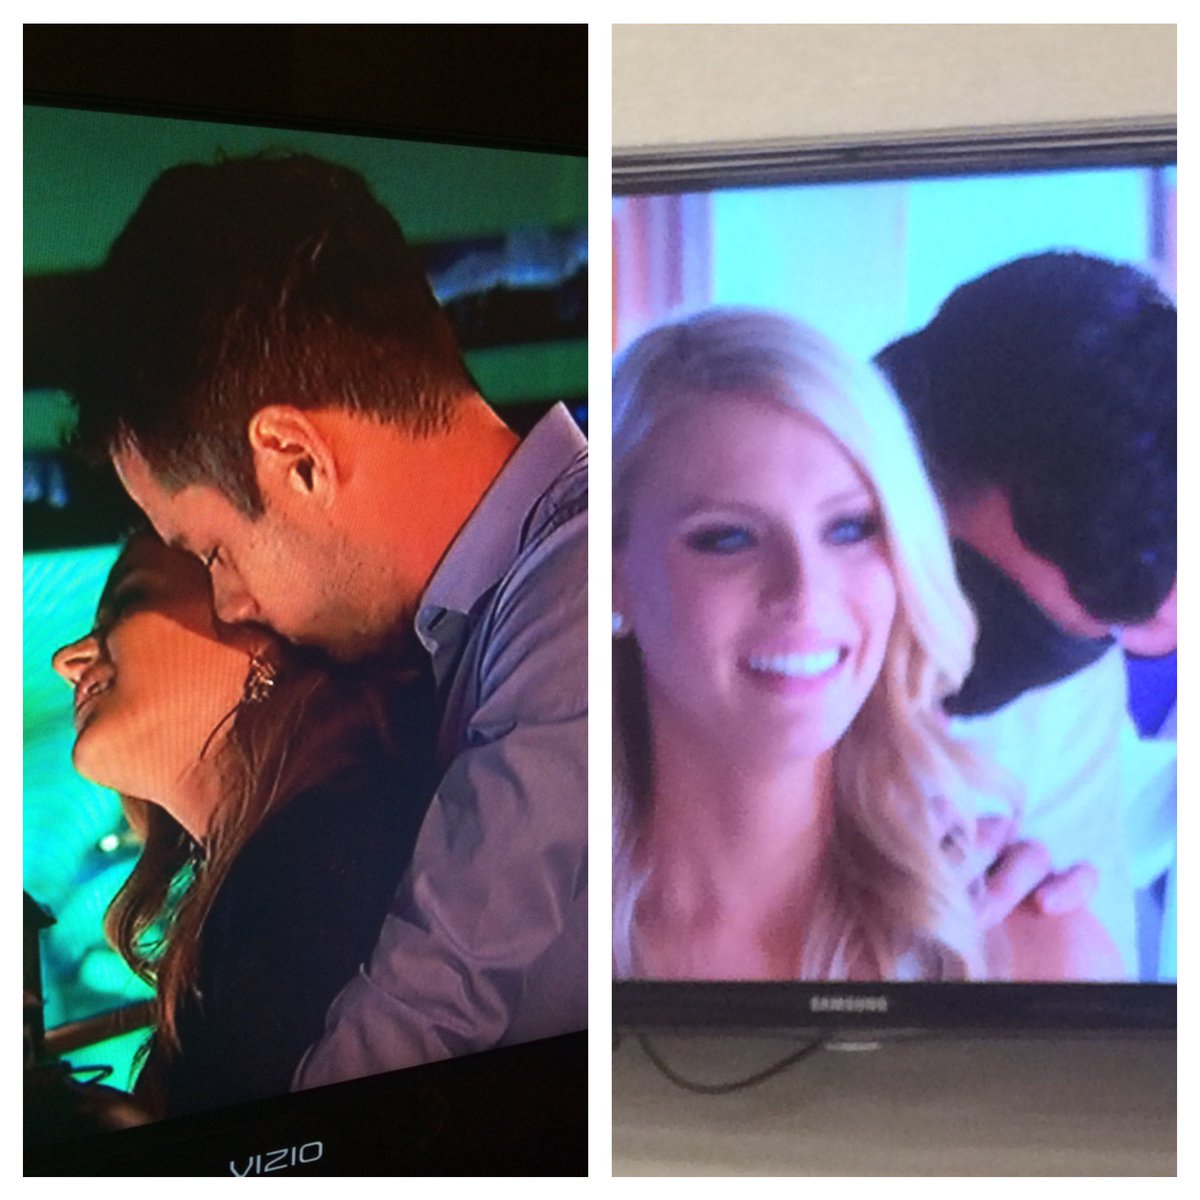 The Bachelor 20 - Ben Higgins - Episode 4 - Discussion - *Sleuthing - Spoilers* - Page 38 CZm91N8XEAMOw1c